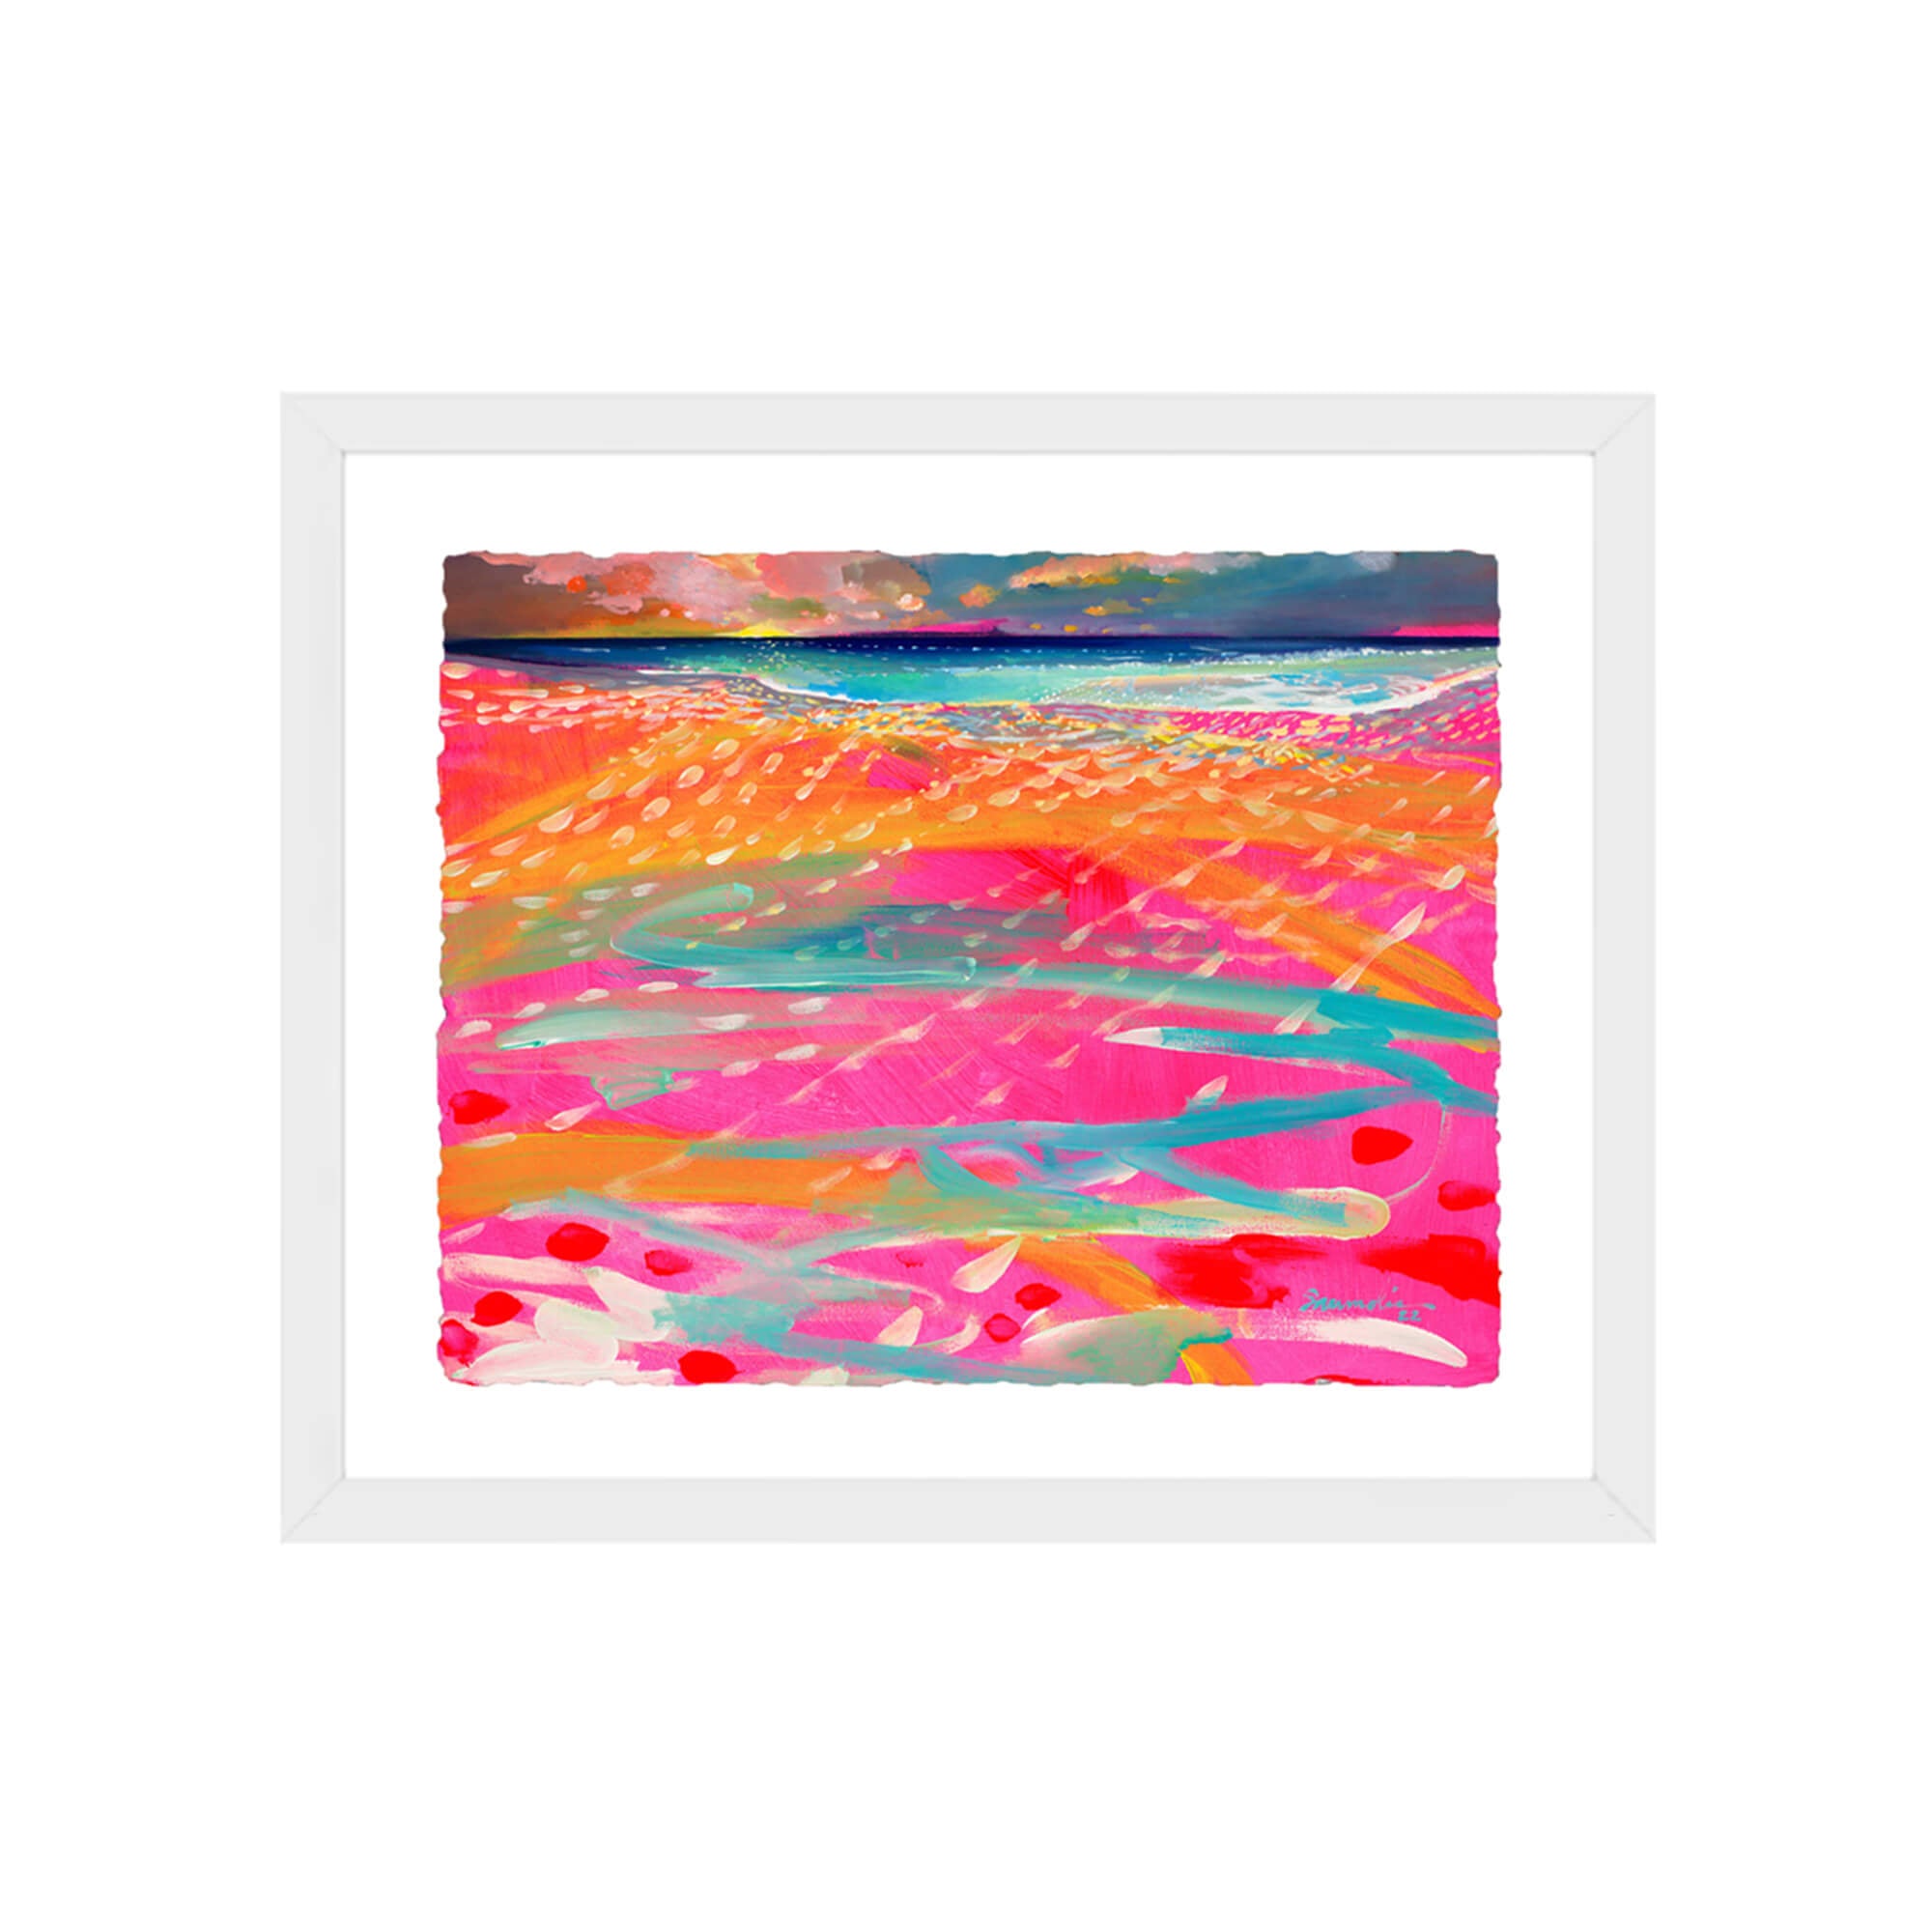 A framed watercolor paper giclée print featuring this beautiful vibrant neon-colored seascape by popular Hawaii artist Saumolia Puapuaga